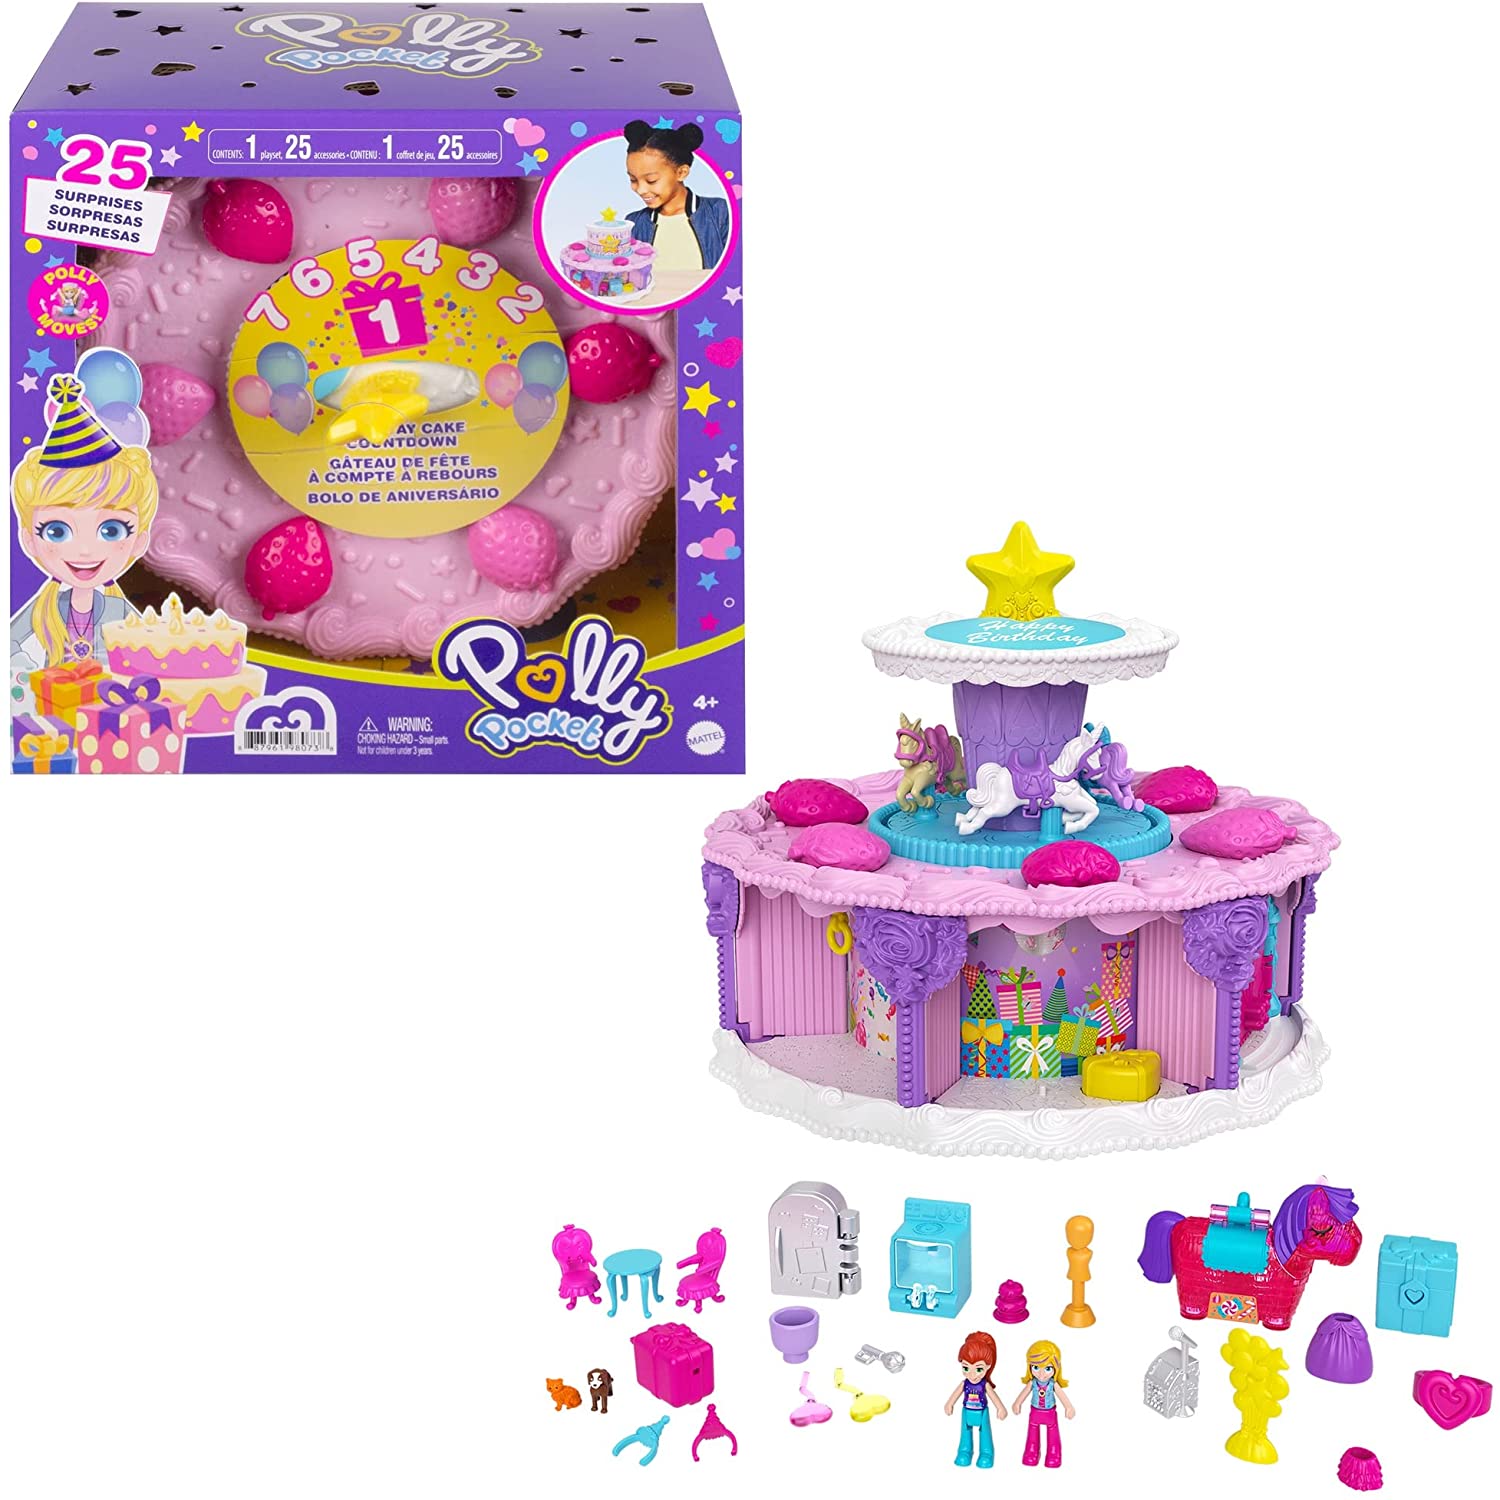 Polly Pocket 2-In-1 Unicorn Toy Playset, Spin 'N Surprise Birthday with  Micro Polly & Lila Dolls, Plus 25 Accessories